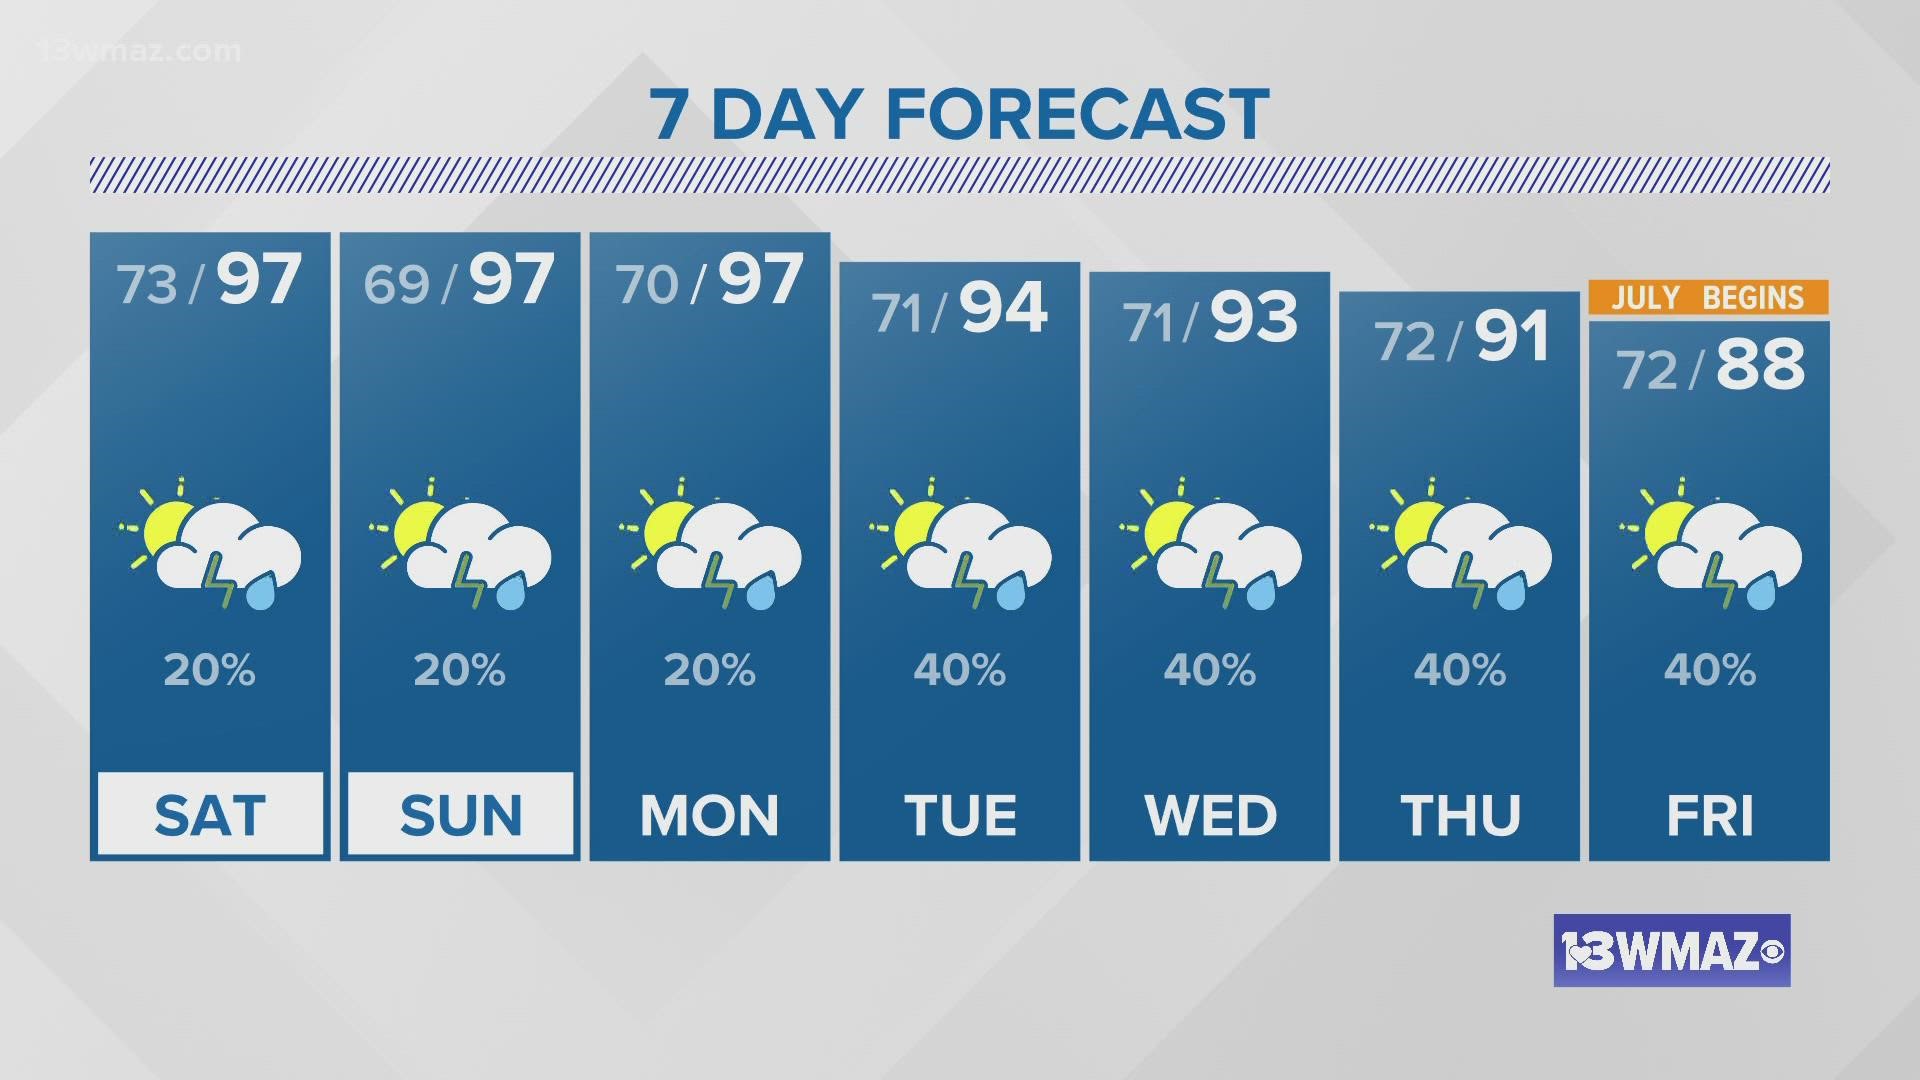 We will be in the 90s both days this weekend with very small rain chances in the afternoons.